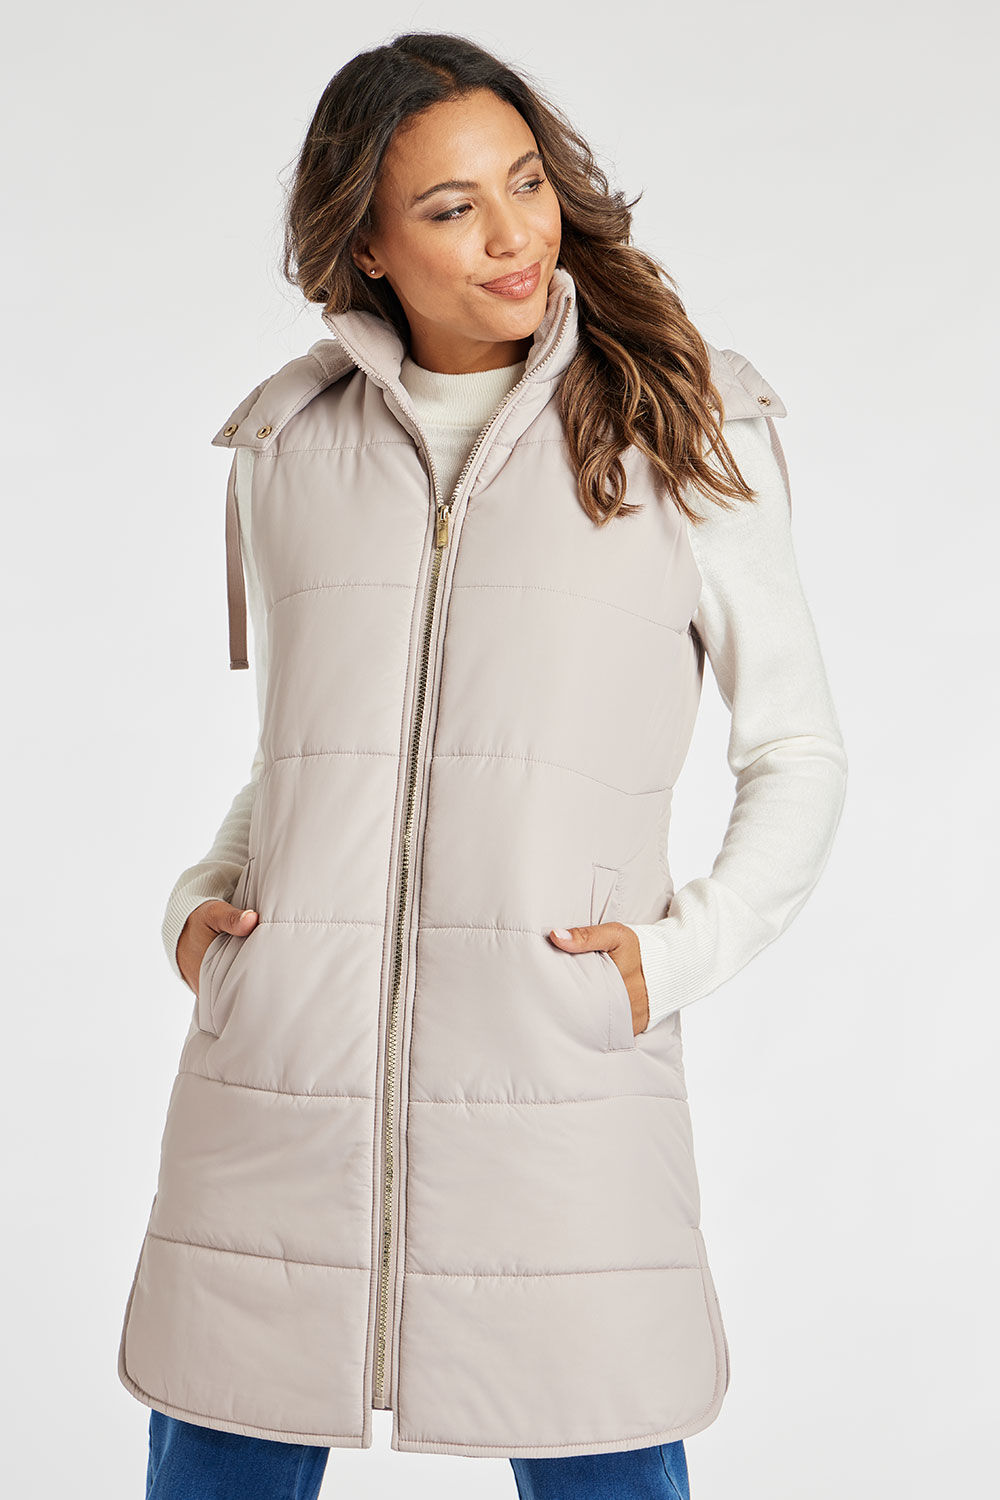 Bonmarche Oyster Fleece Detail Gilet With Removable Hood, Size: 10